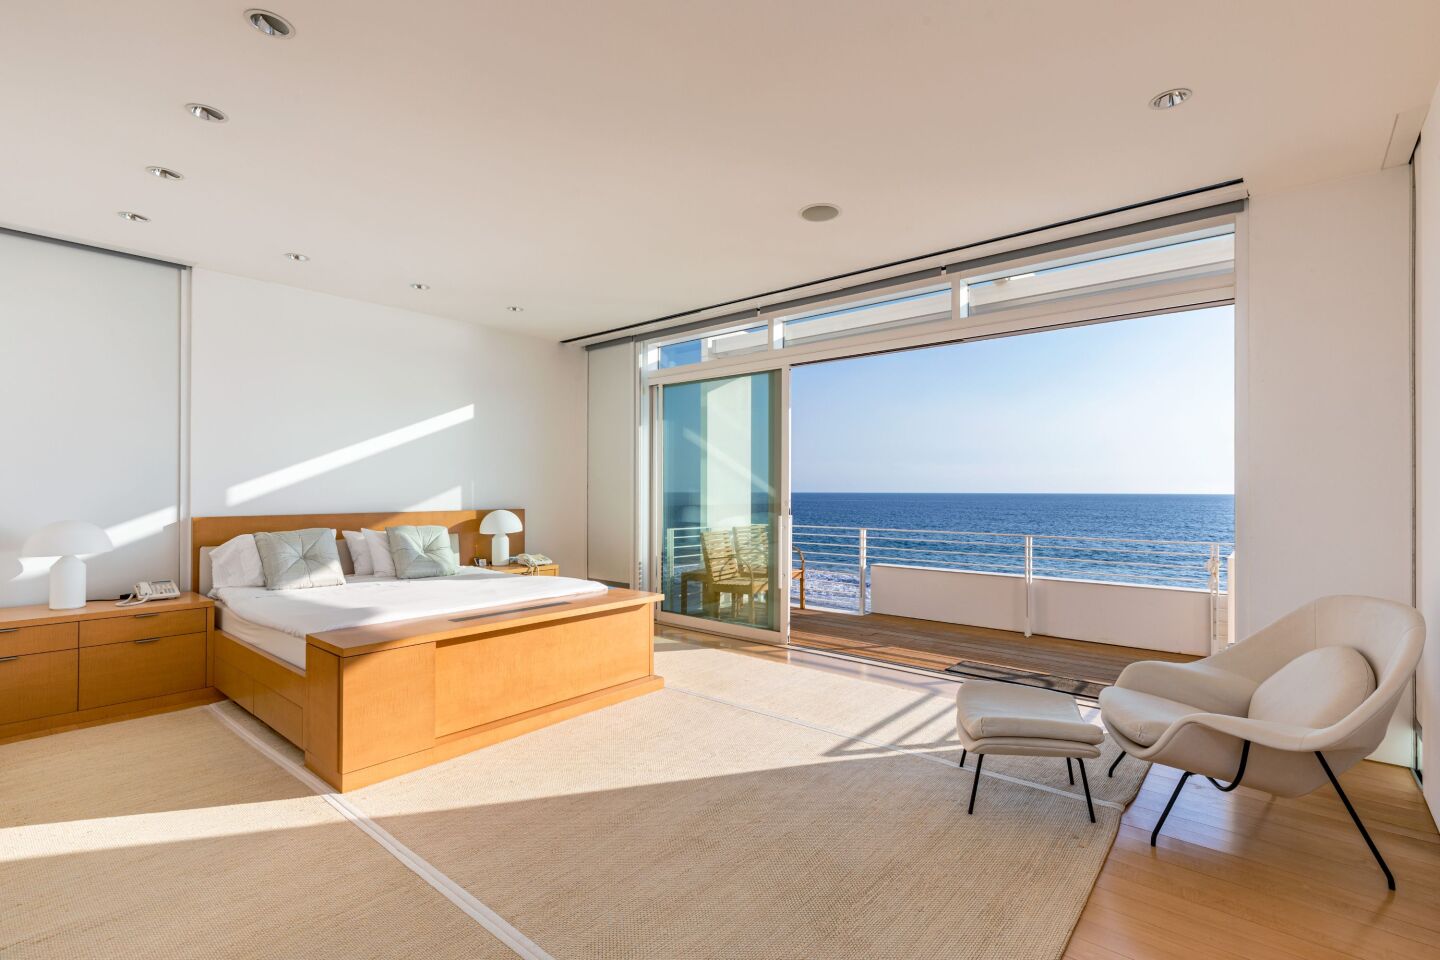 A large, airy room has a view of the ocean.